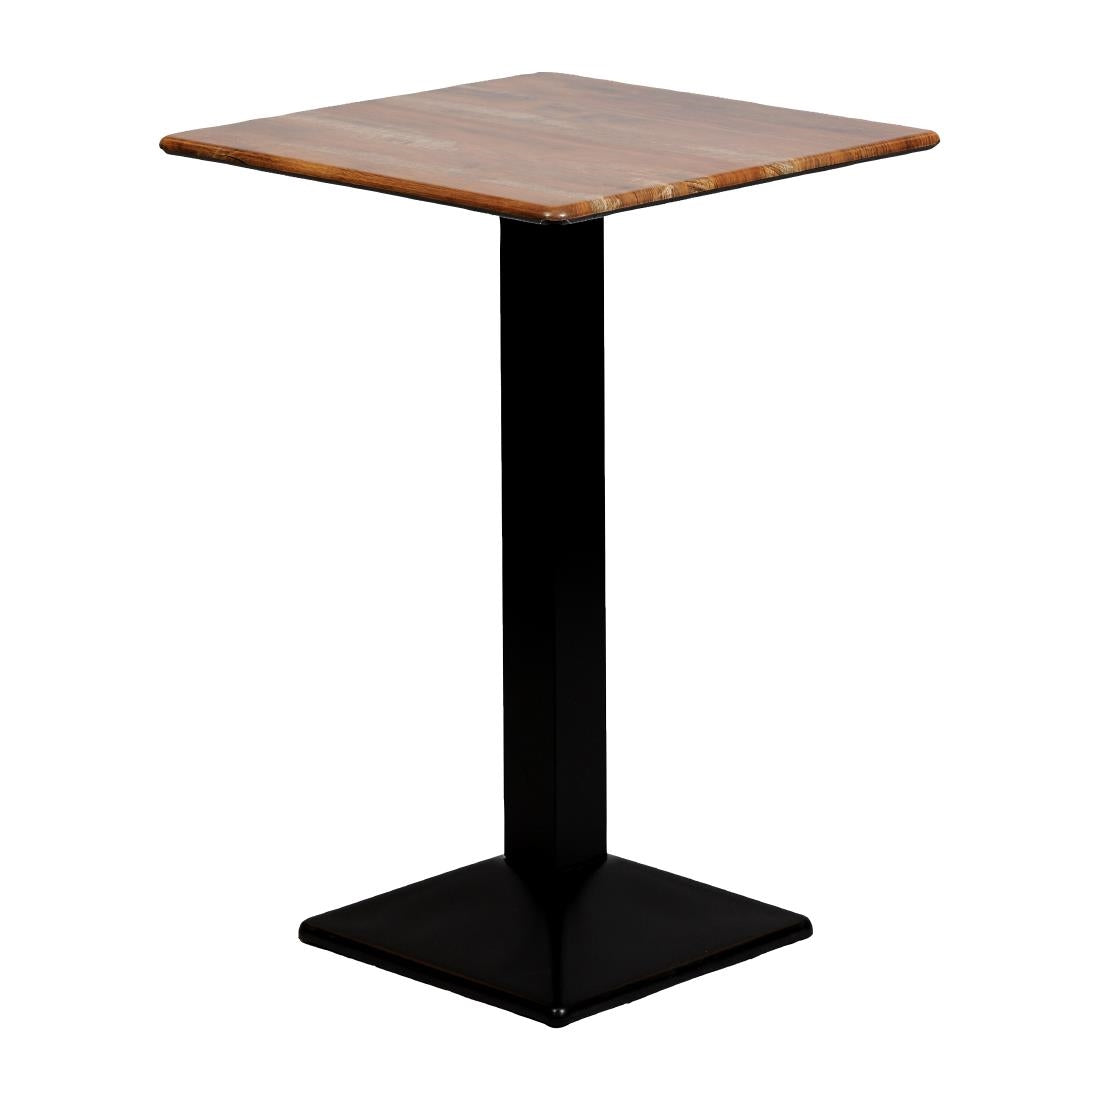 CZ832 Turin Metal Base Square Poseur Table with Laminate Top Planked Oak 700mm JD Catering Equipment Solutions Ltd